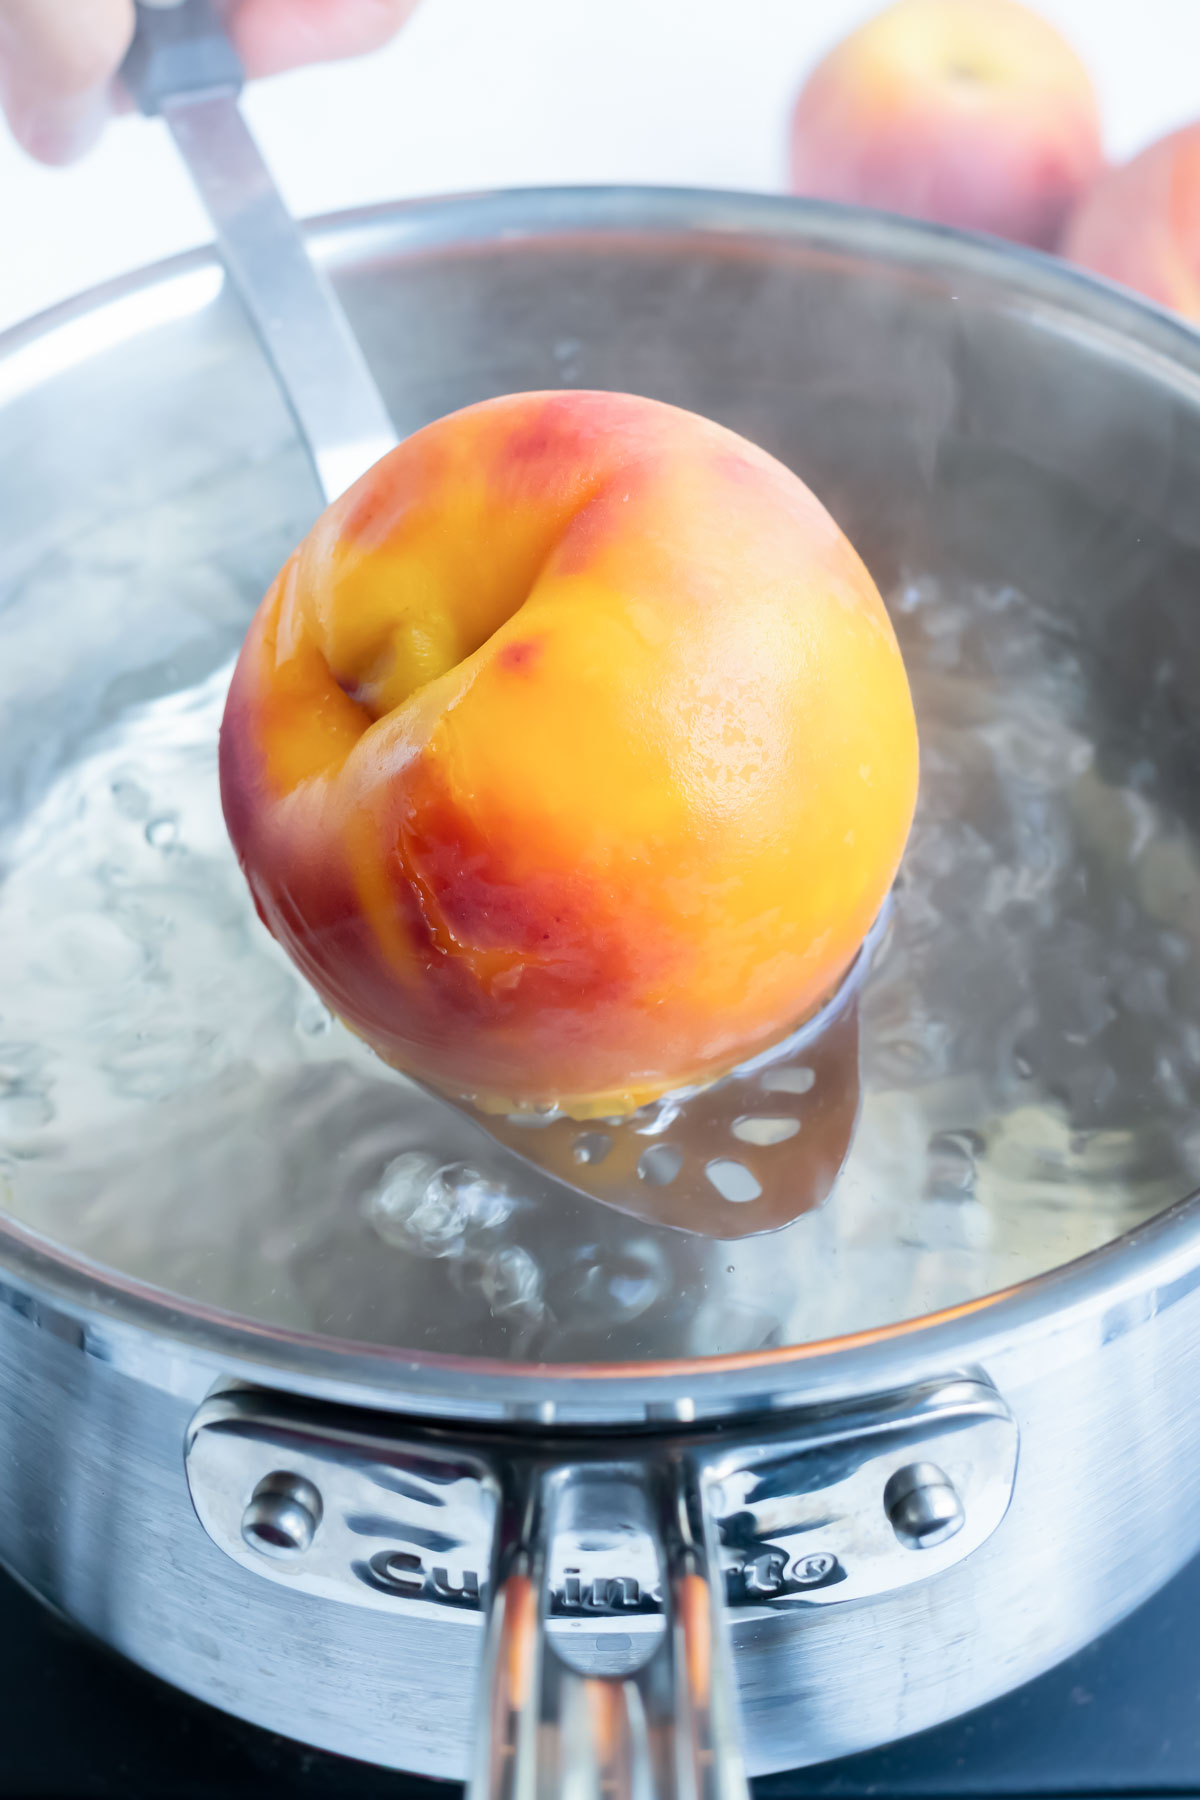 A whole peach is blanched in a pot of hot water and taken out with a metal spoon in preparation for peeling.